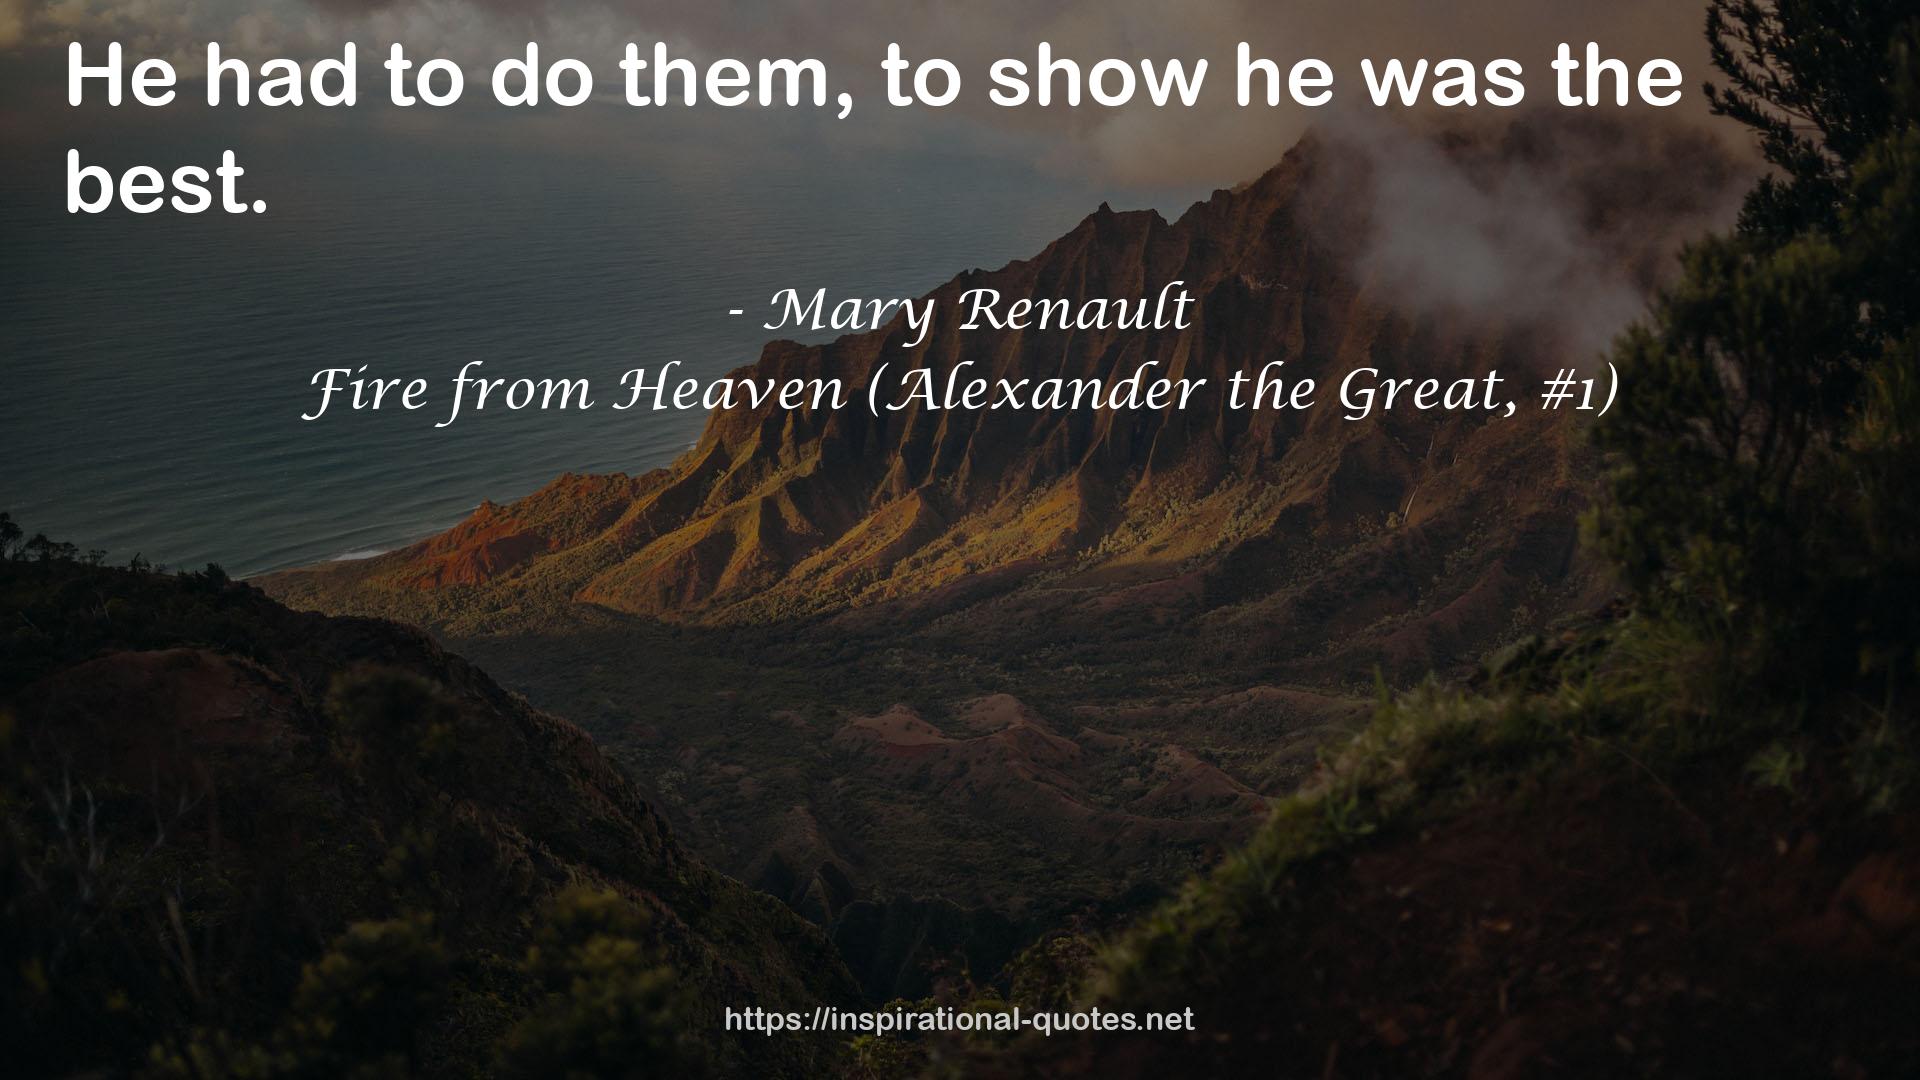 Fire from Heaven (Alexander the Great, #1) QUOTES